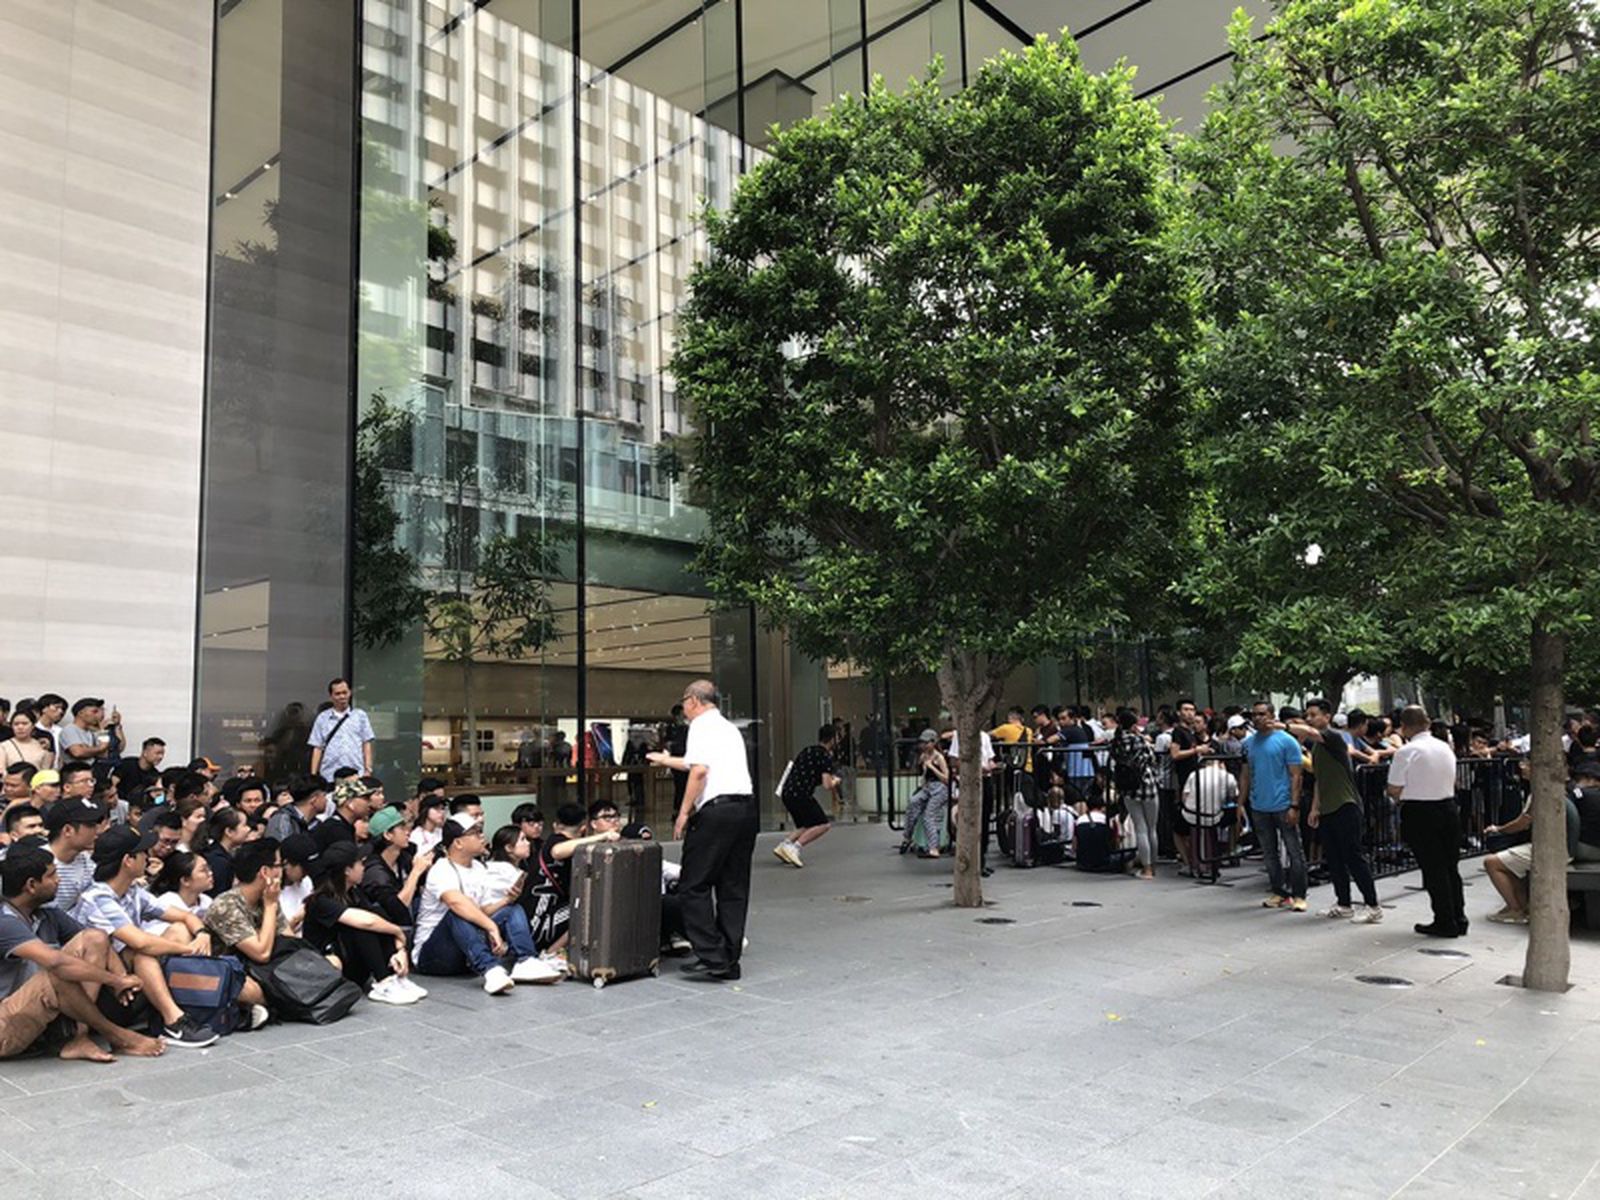 Individuals stand in line for the release of the new iPhone 11 at